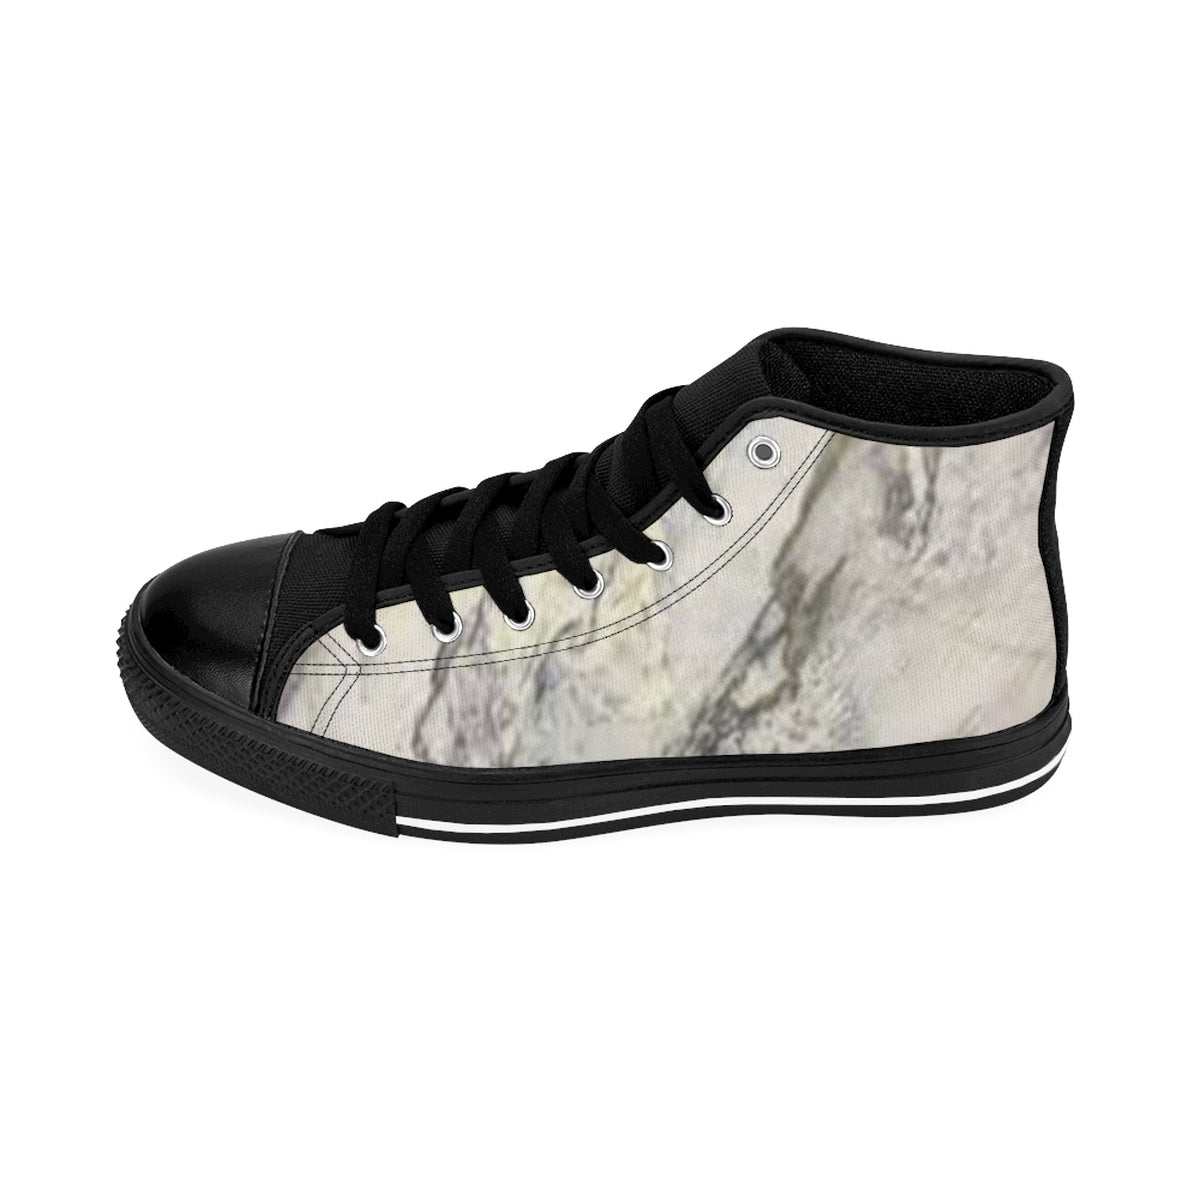 MojoSoMint Marble High-top Sneakers - MojoSoMint